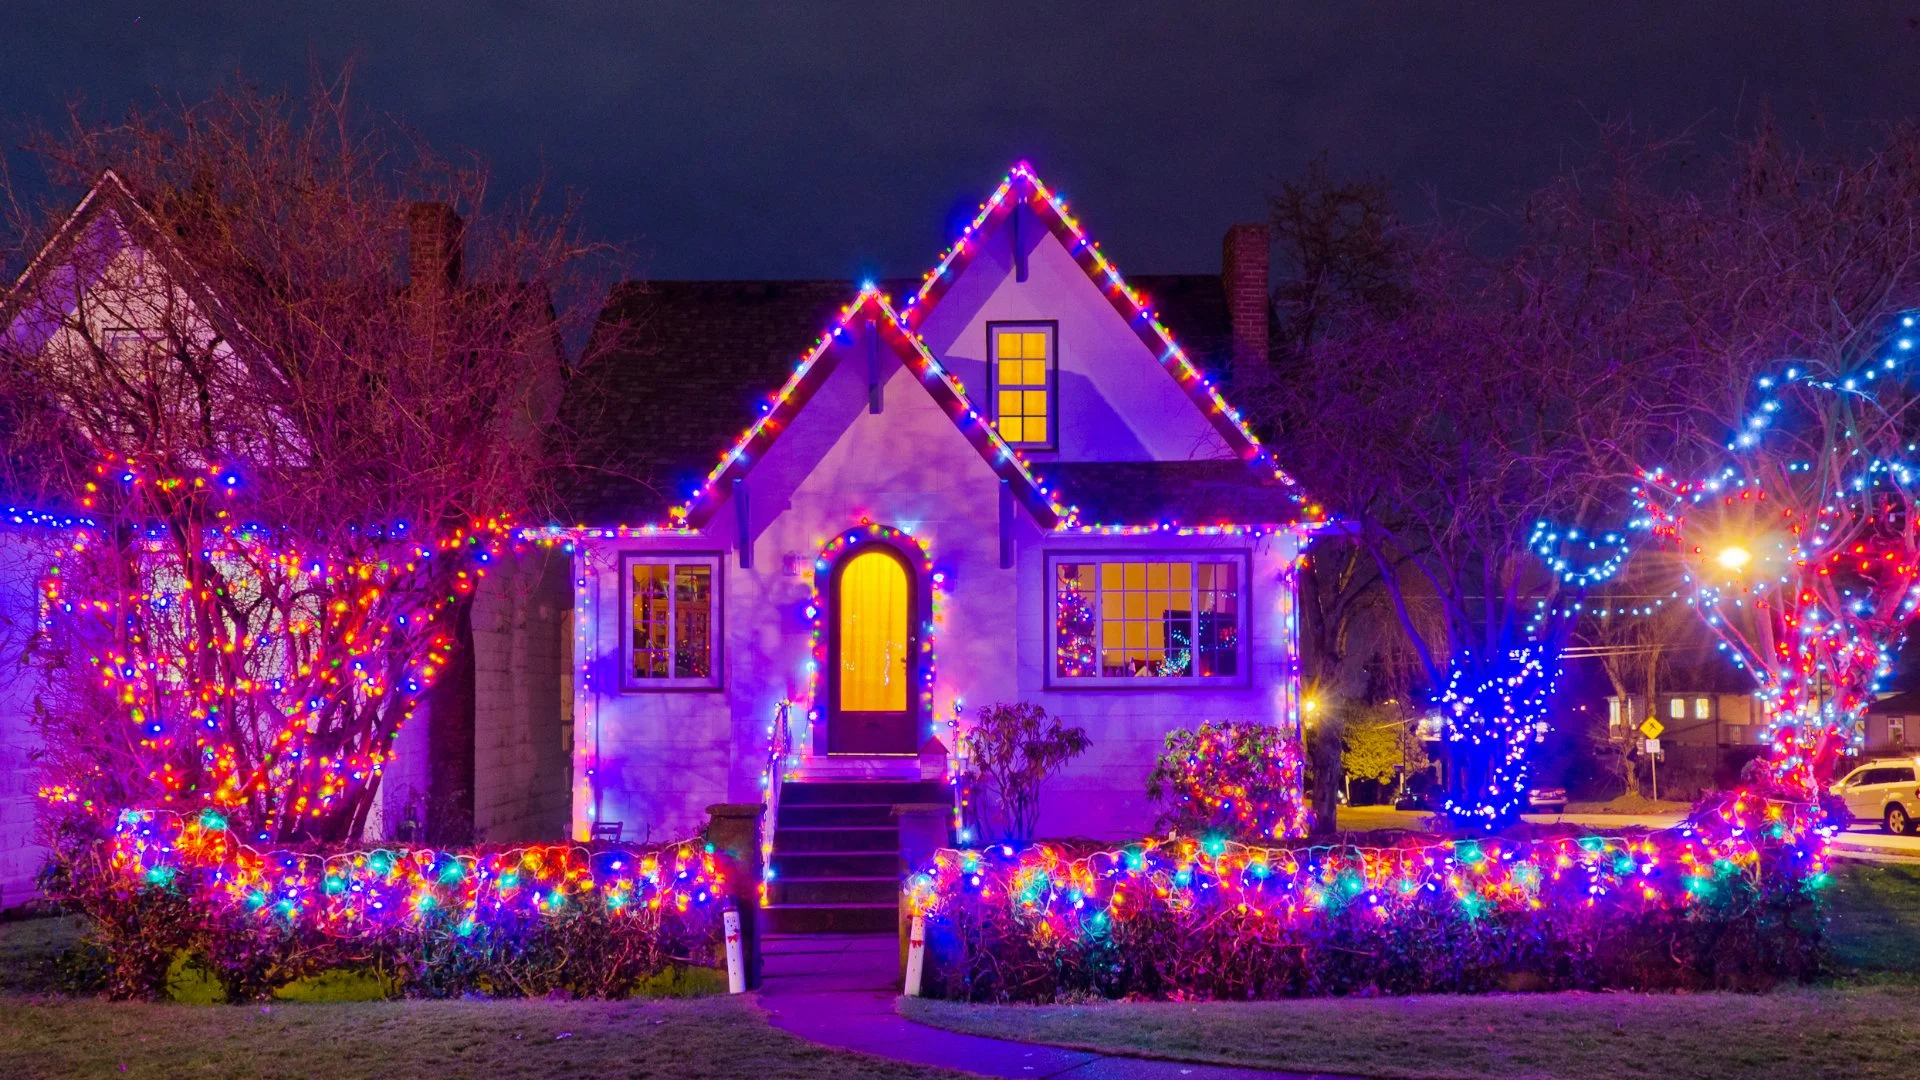 Here's What to Expect With a Professional Holiday Lighting Service